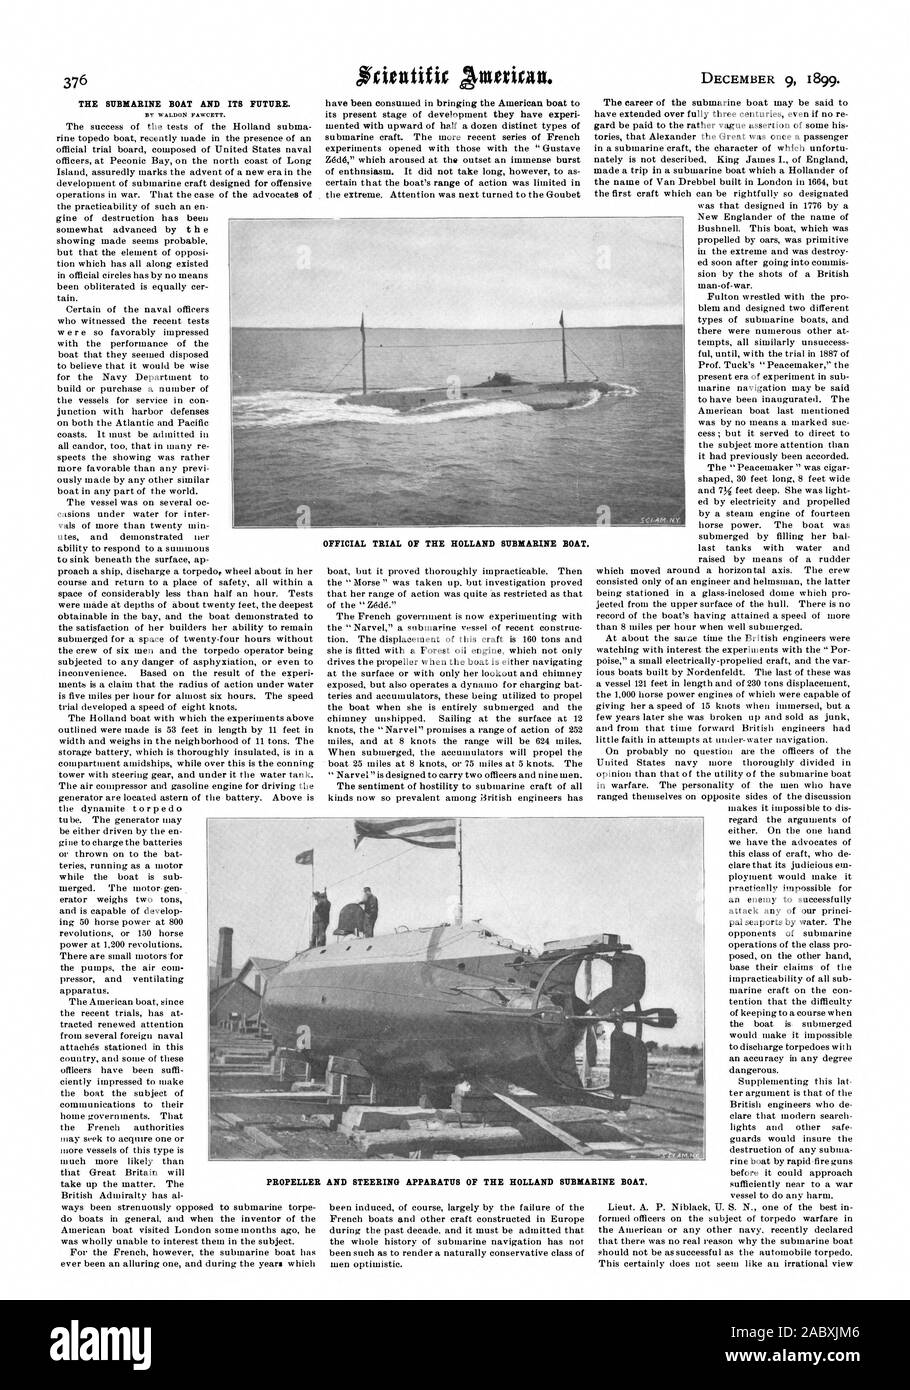 THE SUBMARINE BOAT AND ITS FUTURE. OFFICIAL TRIAL OF THE HOLLAND SUBMARINE BOAT. PROPELLER AND STEERING APPARATUS OF THE HOLLAND SUBMARINE BOAT., scientific american, 1899-12-09 Stock Photo